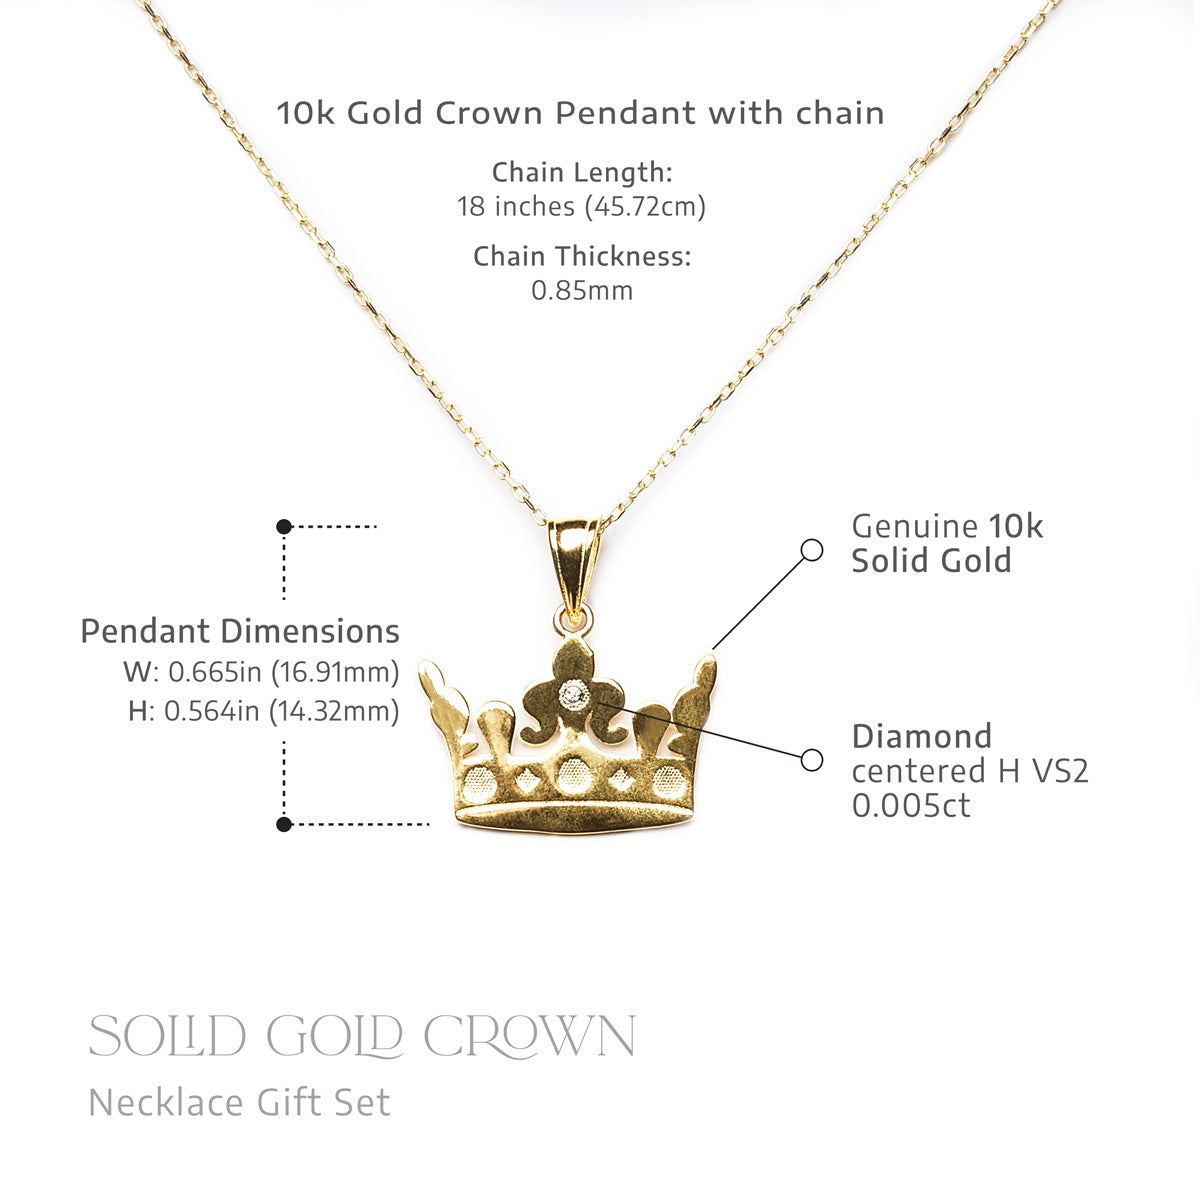 To My Badass Mom - Solid Gold Crown Necklace Gift Set